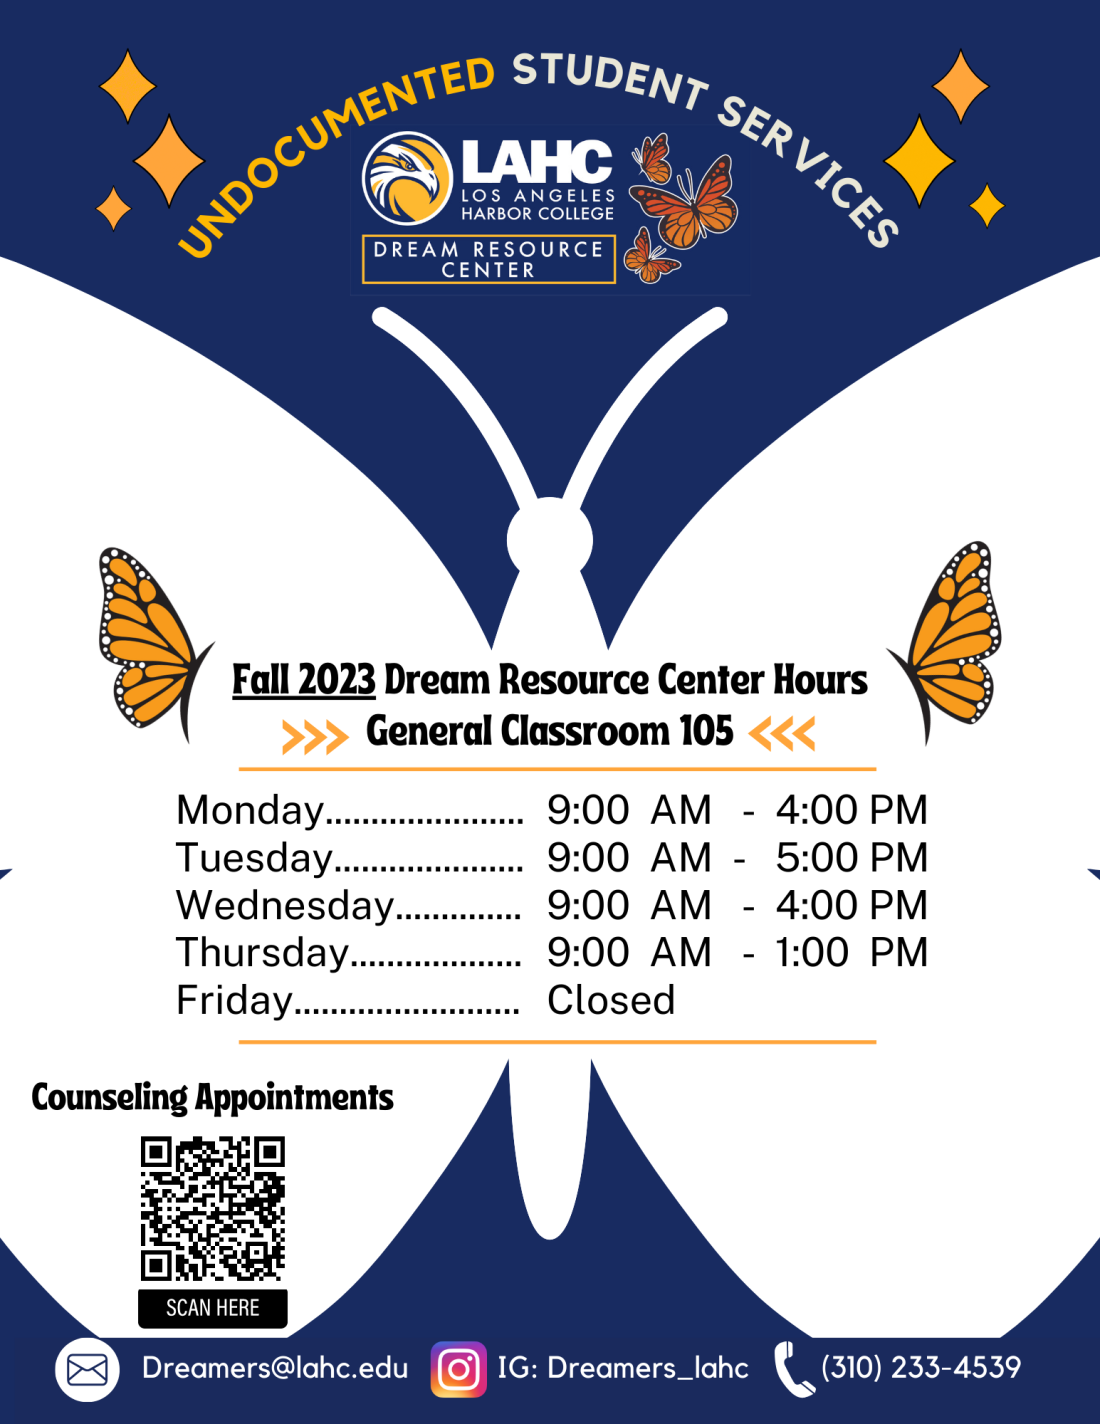 Fall 2023 Dream Resource Center hours: Monday: 9am - 4pm, Tuesday: 9am - 5pm, Wednesday: 9am - 4pm, Thursday: 9am - 1pm, Friday: Closed